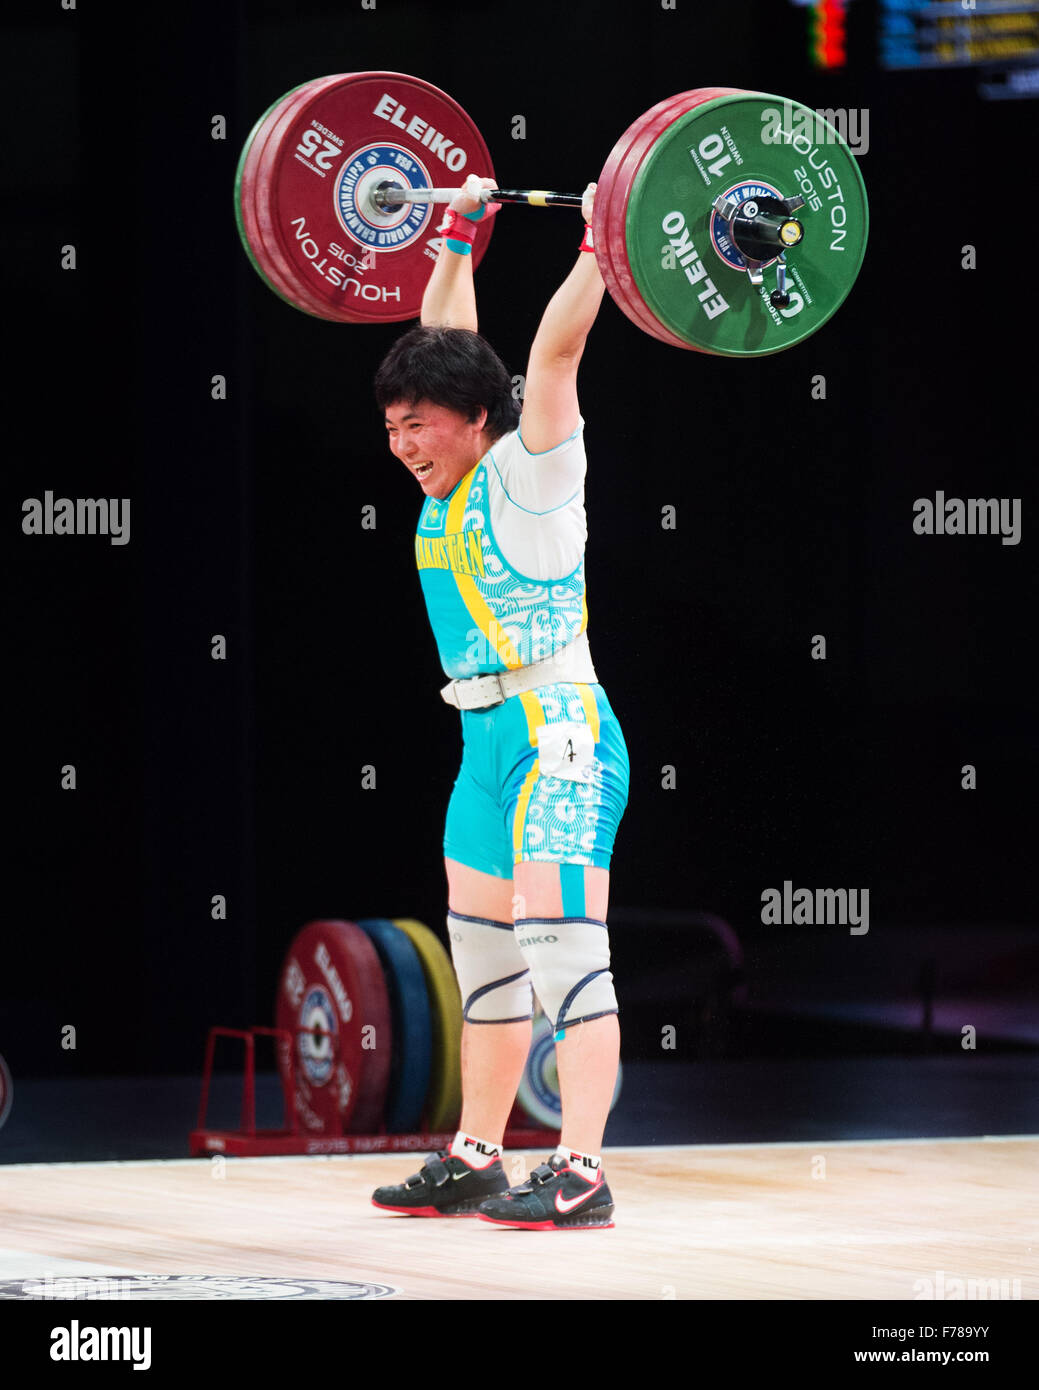 Houston, Texas, USA. 26th November, 2015.  Zhazira Zhapparrkul wins the clean and jerk and total silver medal in the Women's 69 kilograms at the World Weightlifting Chamionships in in Houston, Texas. Credit:  Brent Clark/Alamy Live News Stock Photo